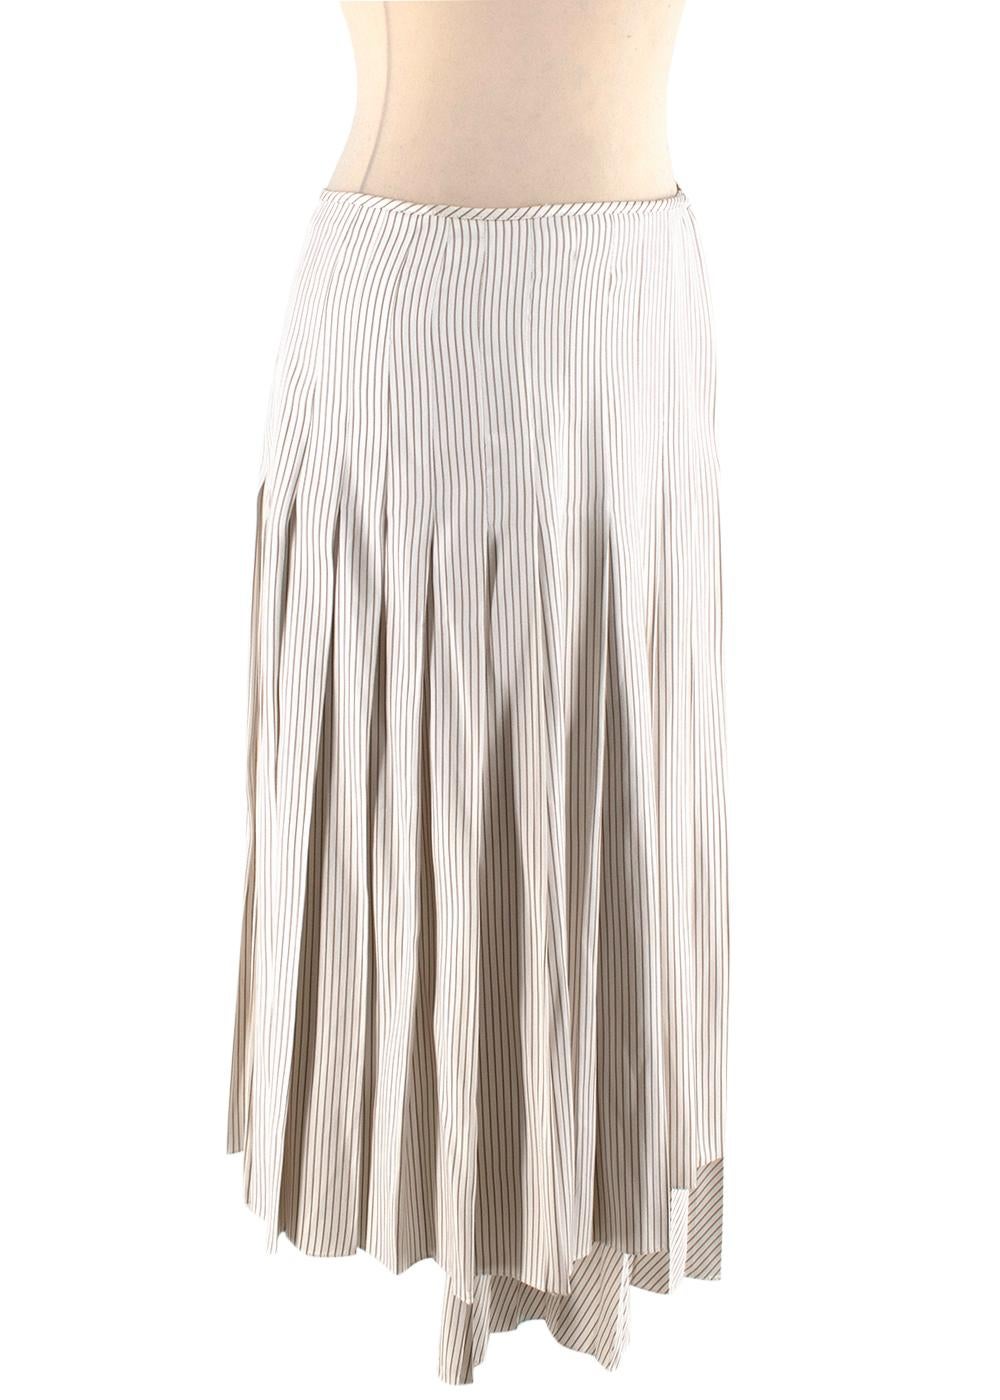 Fendi Ivory Pinstripe Pleated Silk Skirt

- Wrap-front pleated skirt in ivory and khaki pinstriped silk crepe de chine
- Asymmetric hemline
- Popper closure
- Mid-length
- Unlined 

Materials 
100% Silk 

Made in Italy 
Dry Clean Only 
9.5/10